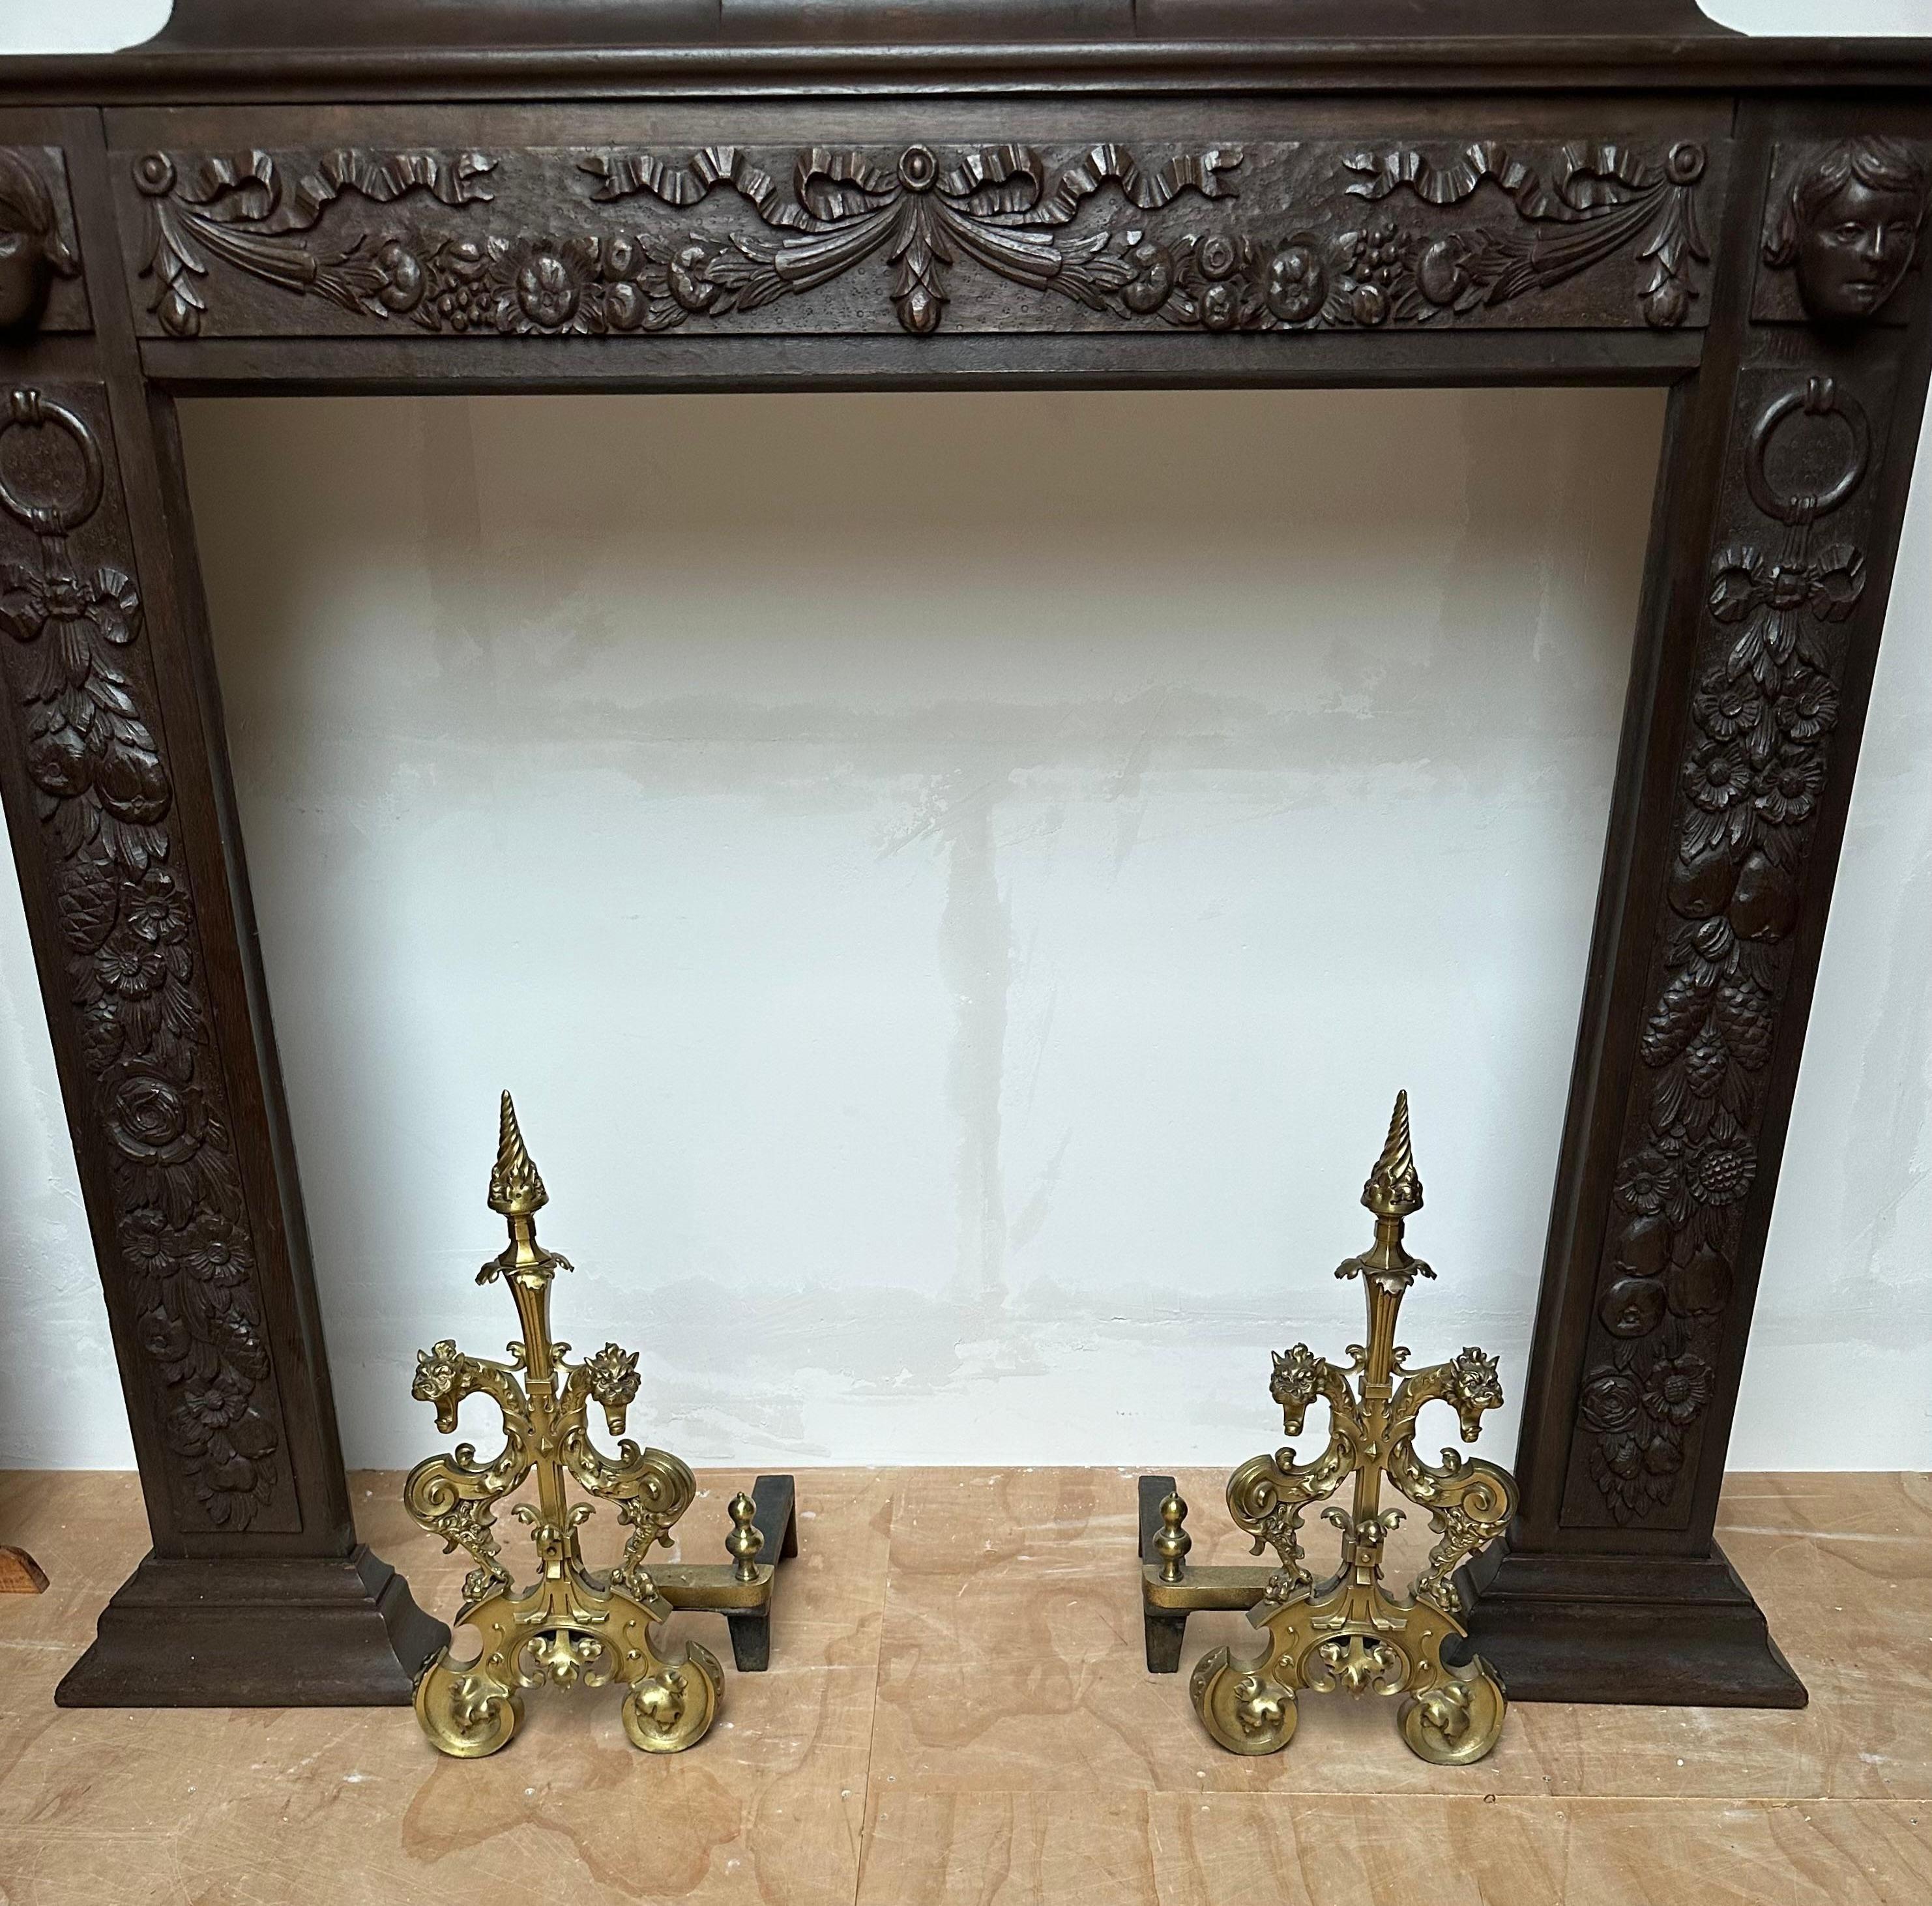 French Antique Gothic Revival Gilt Bronze Dragon Andirons or Firedogs / Fireplace Tools For Sale